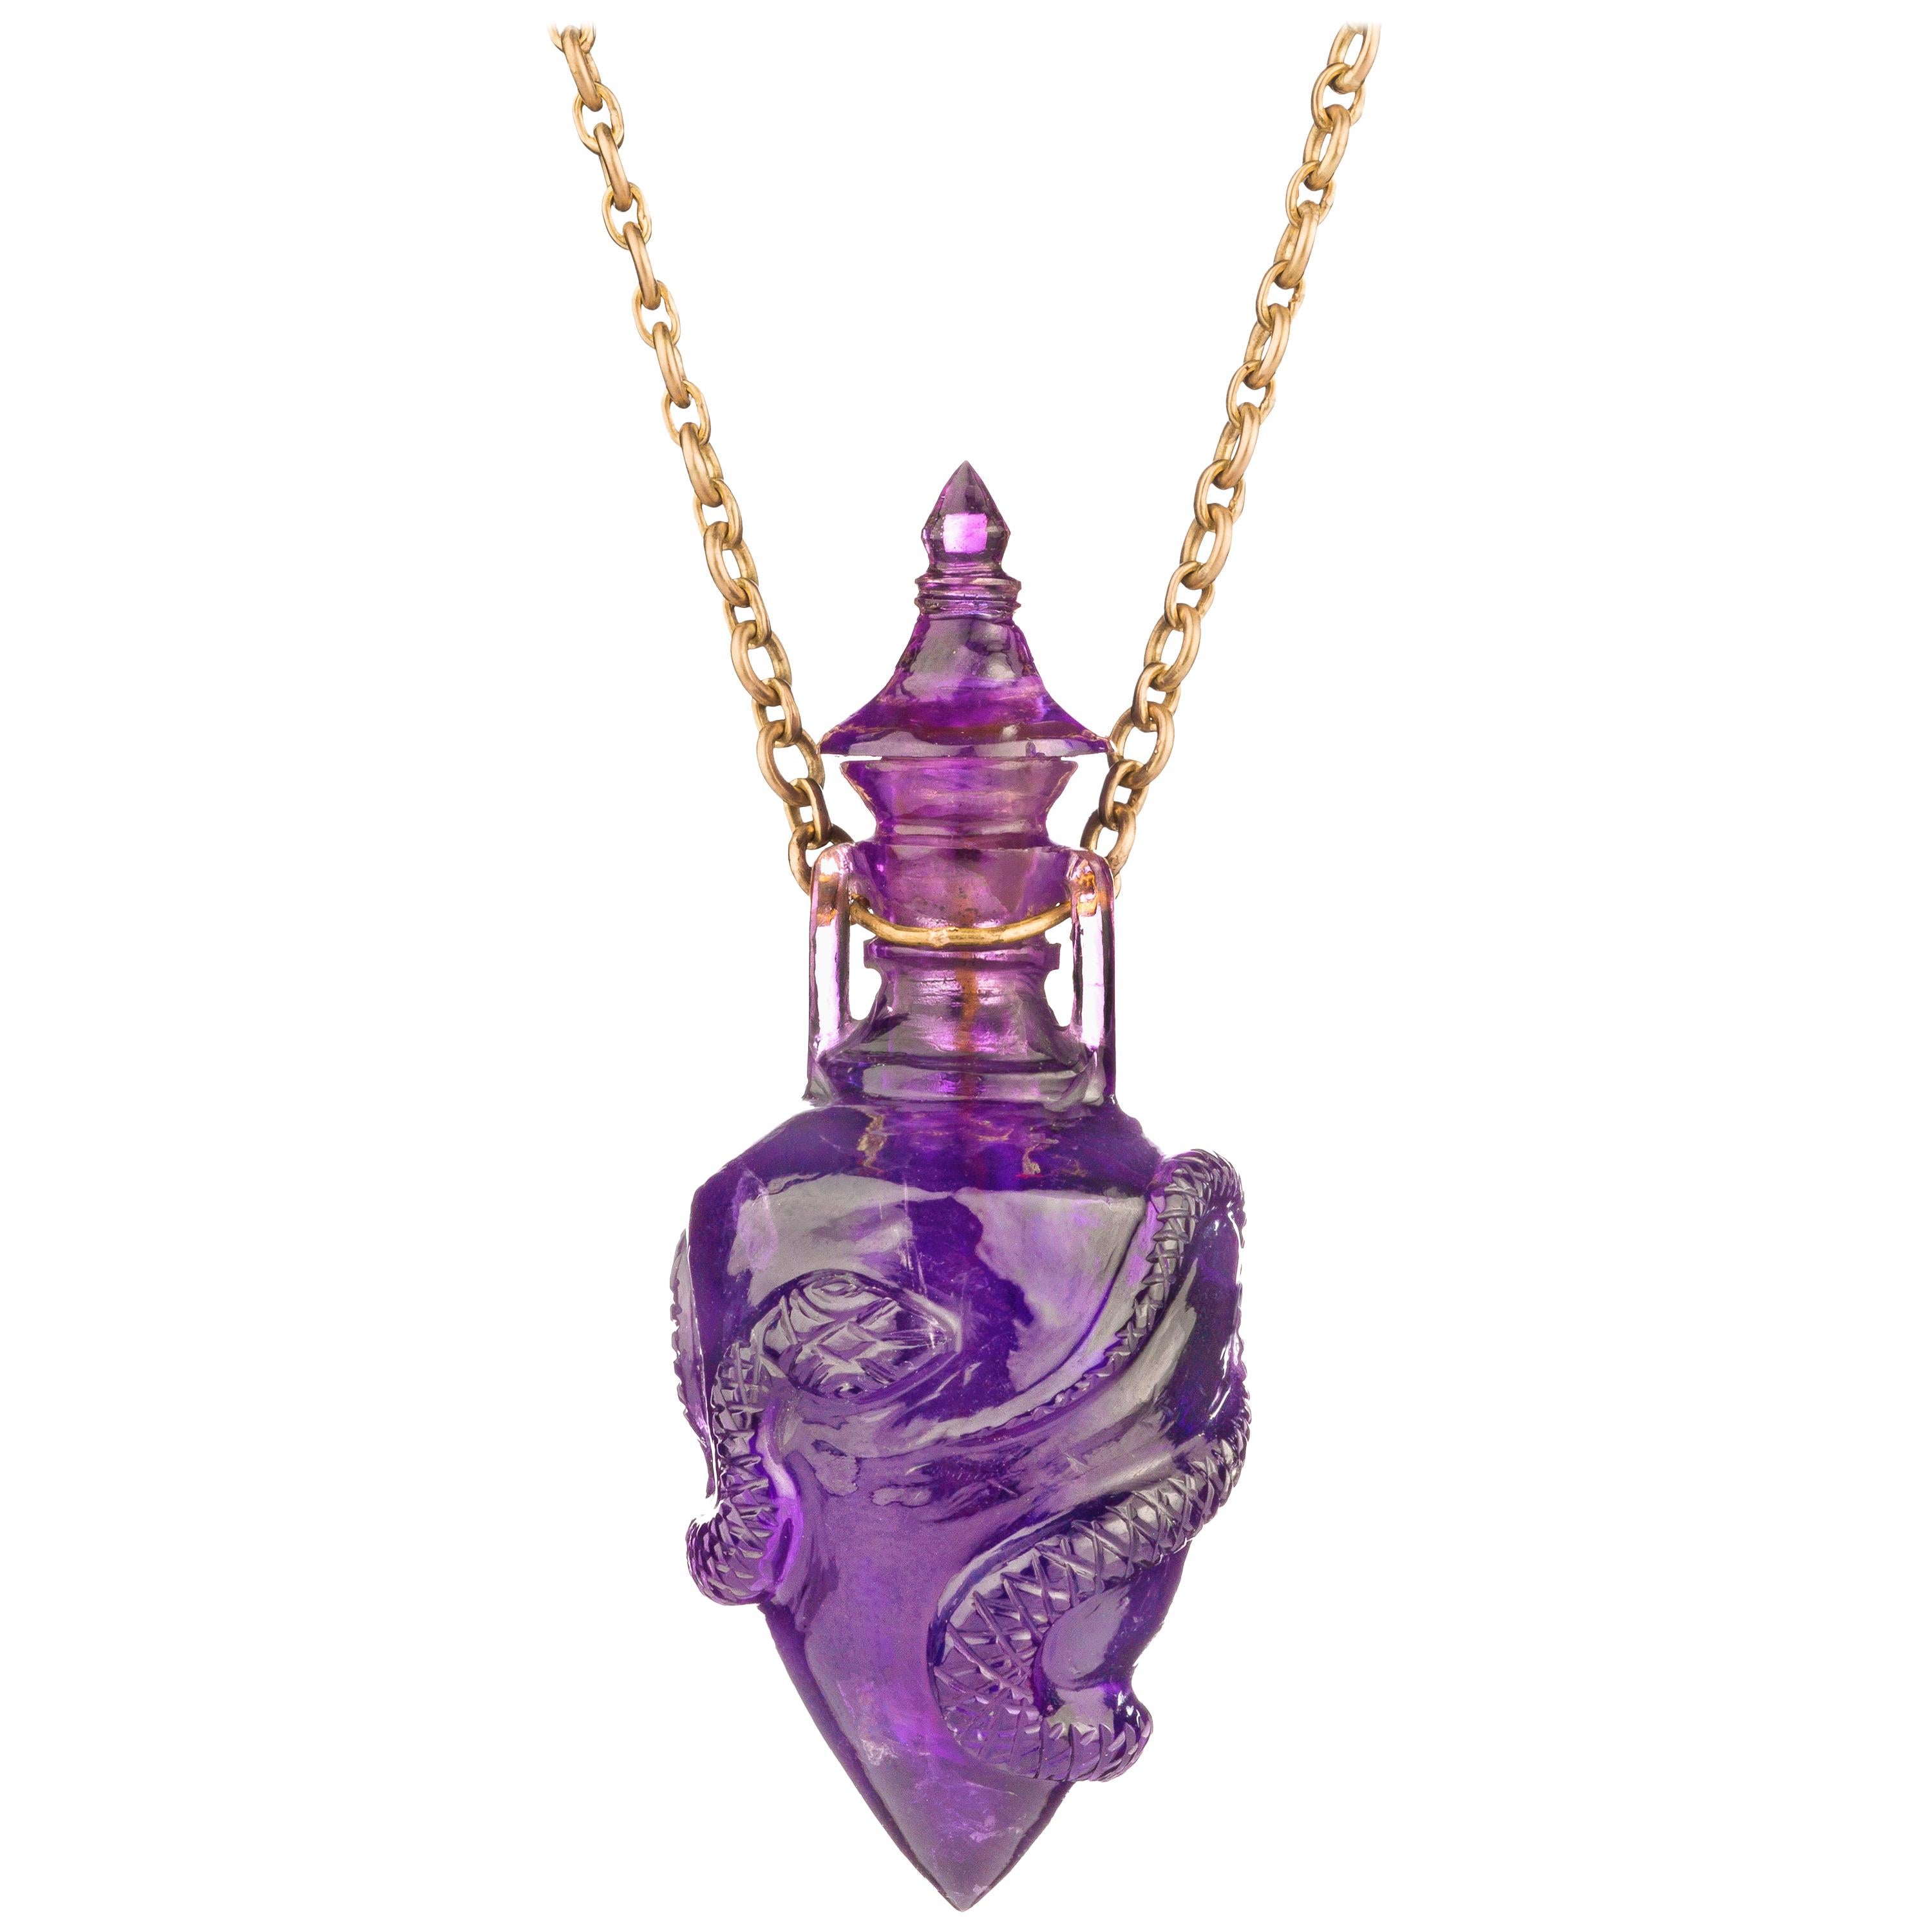 OUROBOROS 18 Karat Gold Chain with an Amethyst Poison Bottle Pendant For Sale